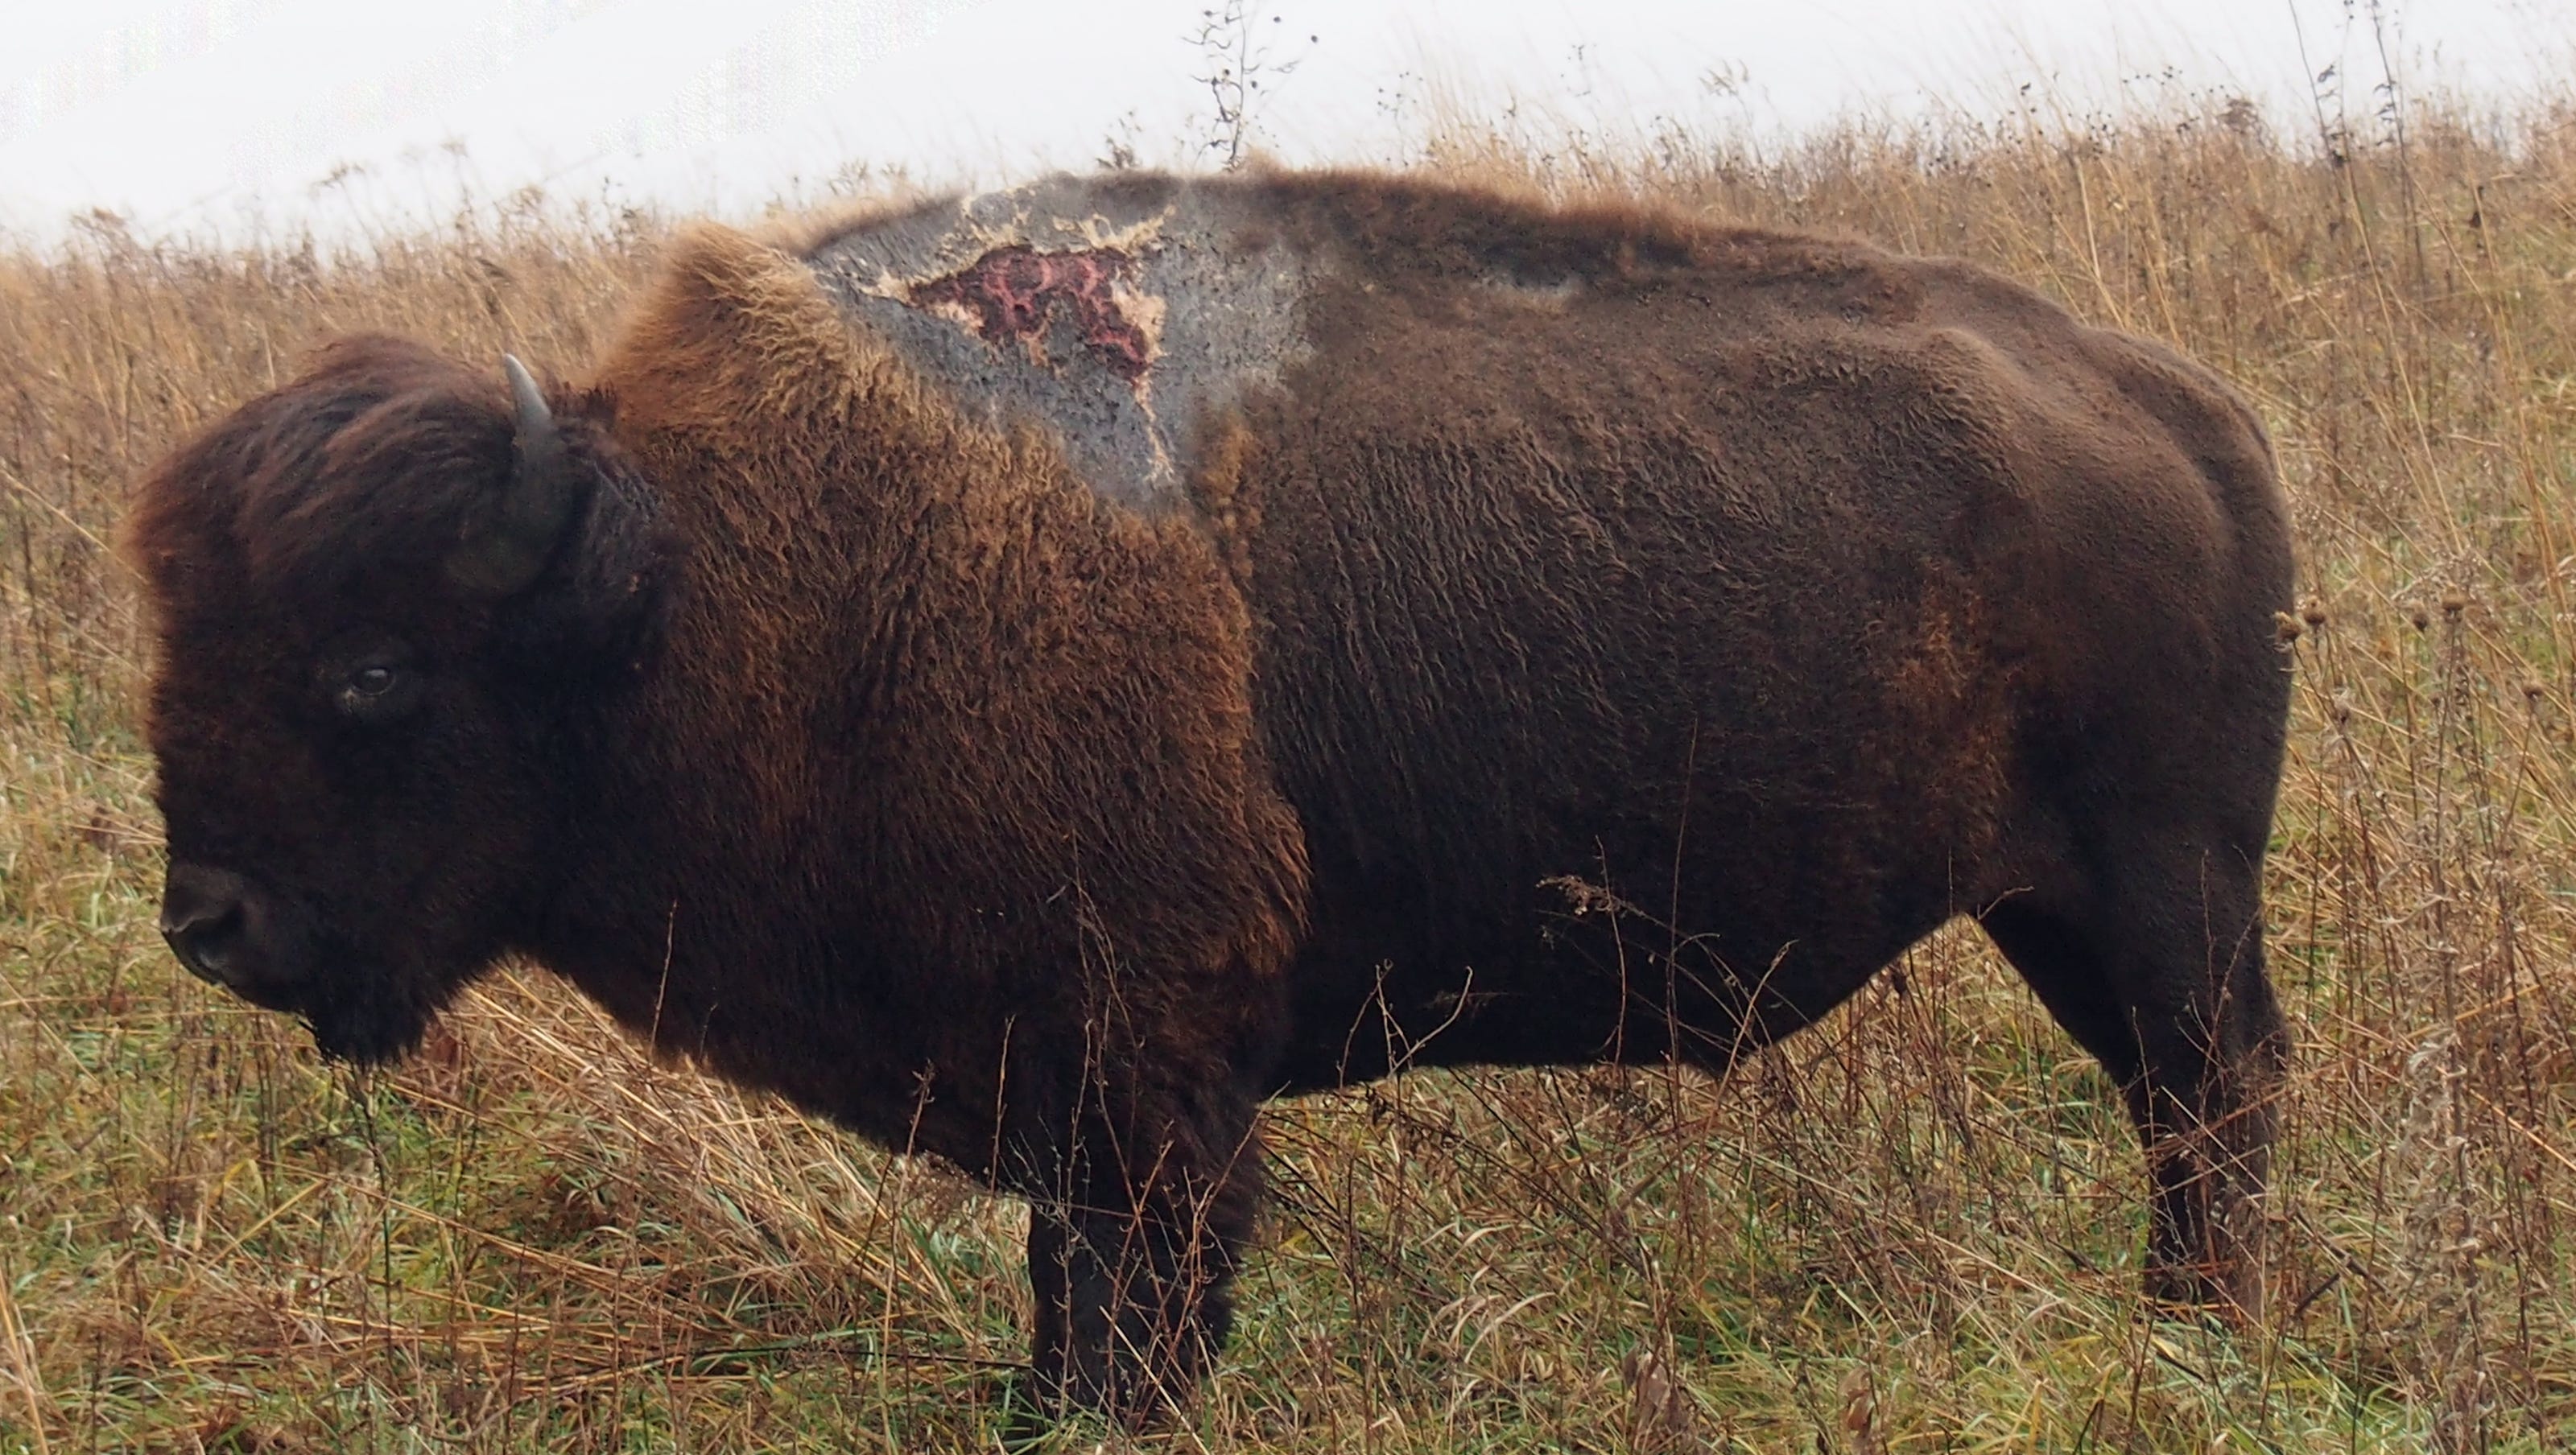 This Iowa bison was spotted — after surviving a lightning strike in 2013